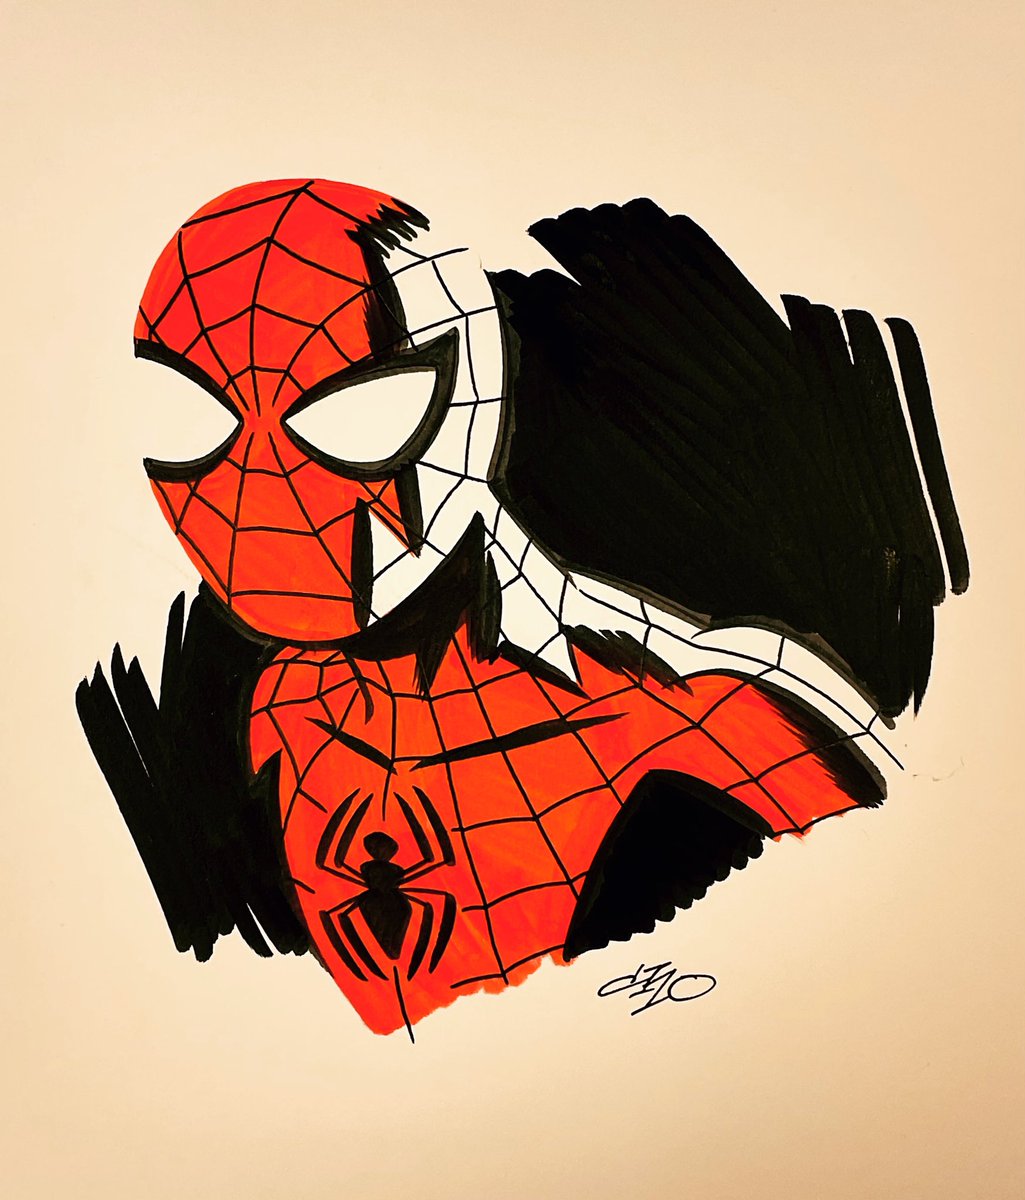 RT @Michael_Cho: Spider-man sketch, in ink markers on bristol. https://t.co/99zJPWyVYW